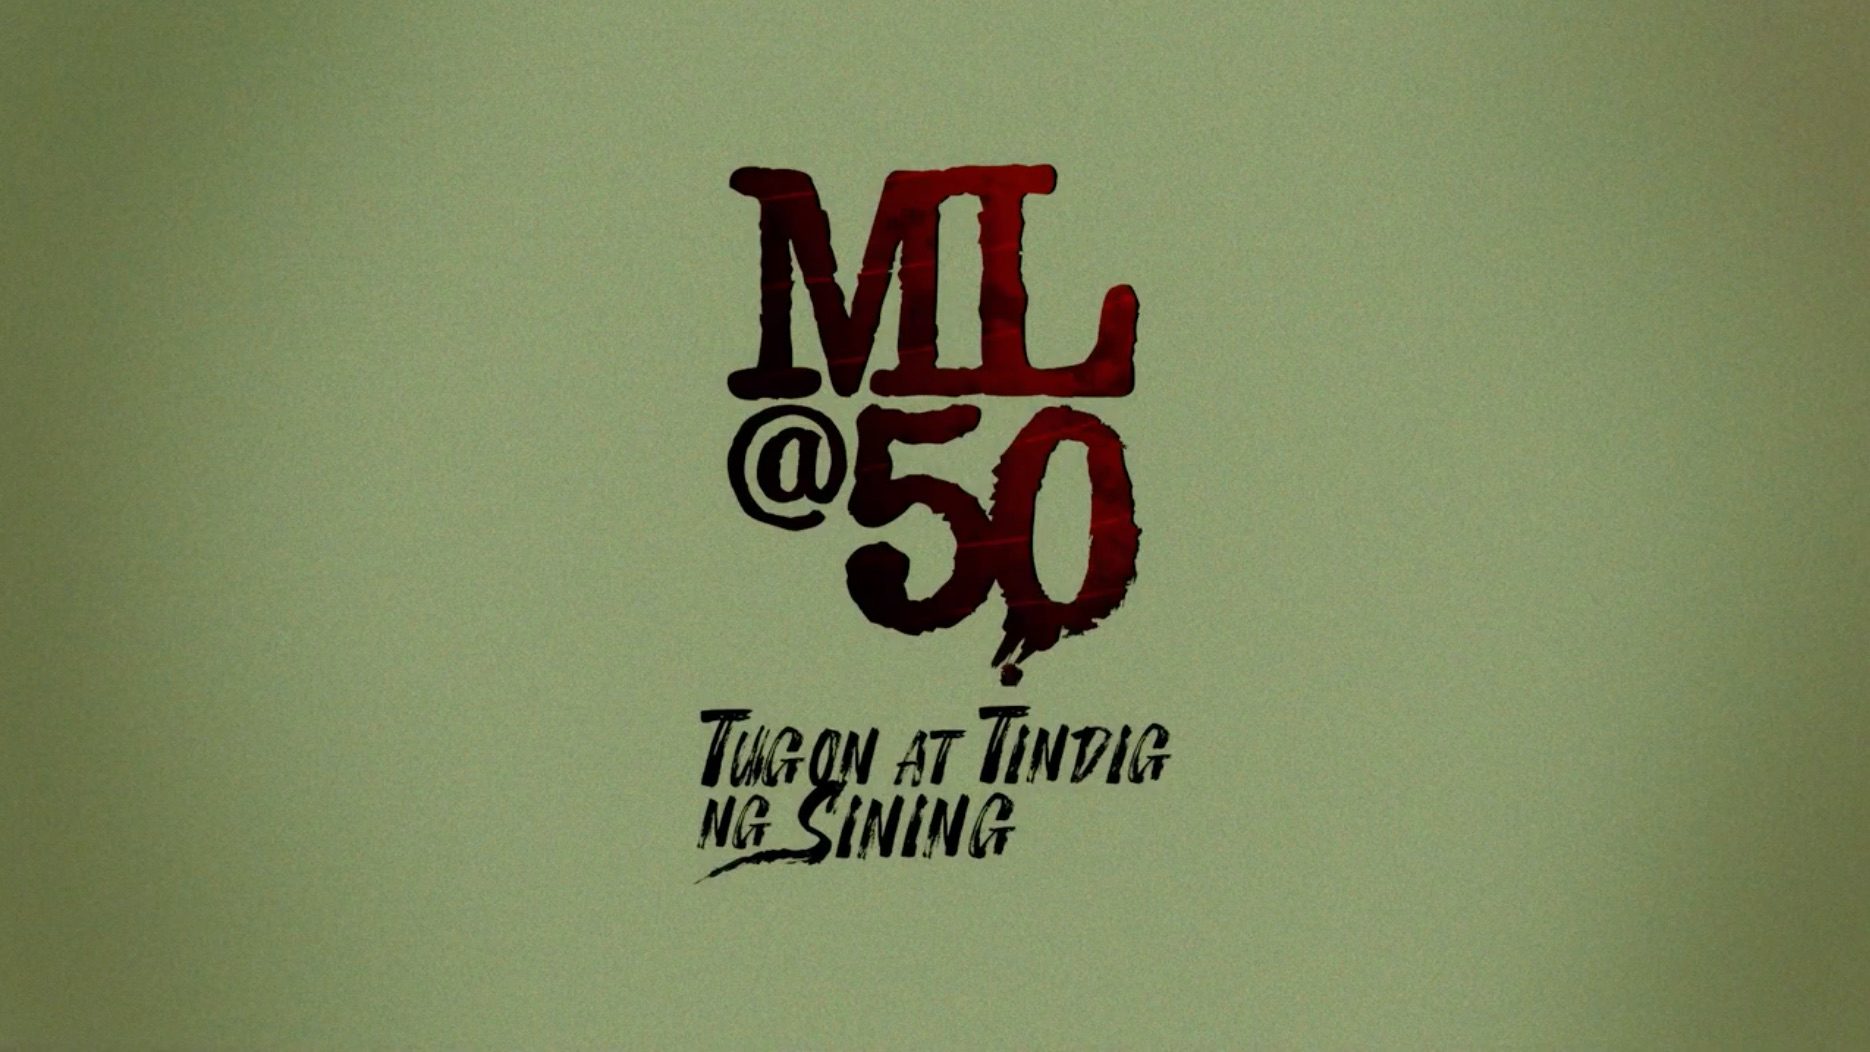 UP Diliman commemorates Martial Law anniversary with ‘Martial Law @ 50 Tugon at Tindig ng Sining’